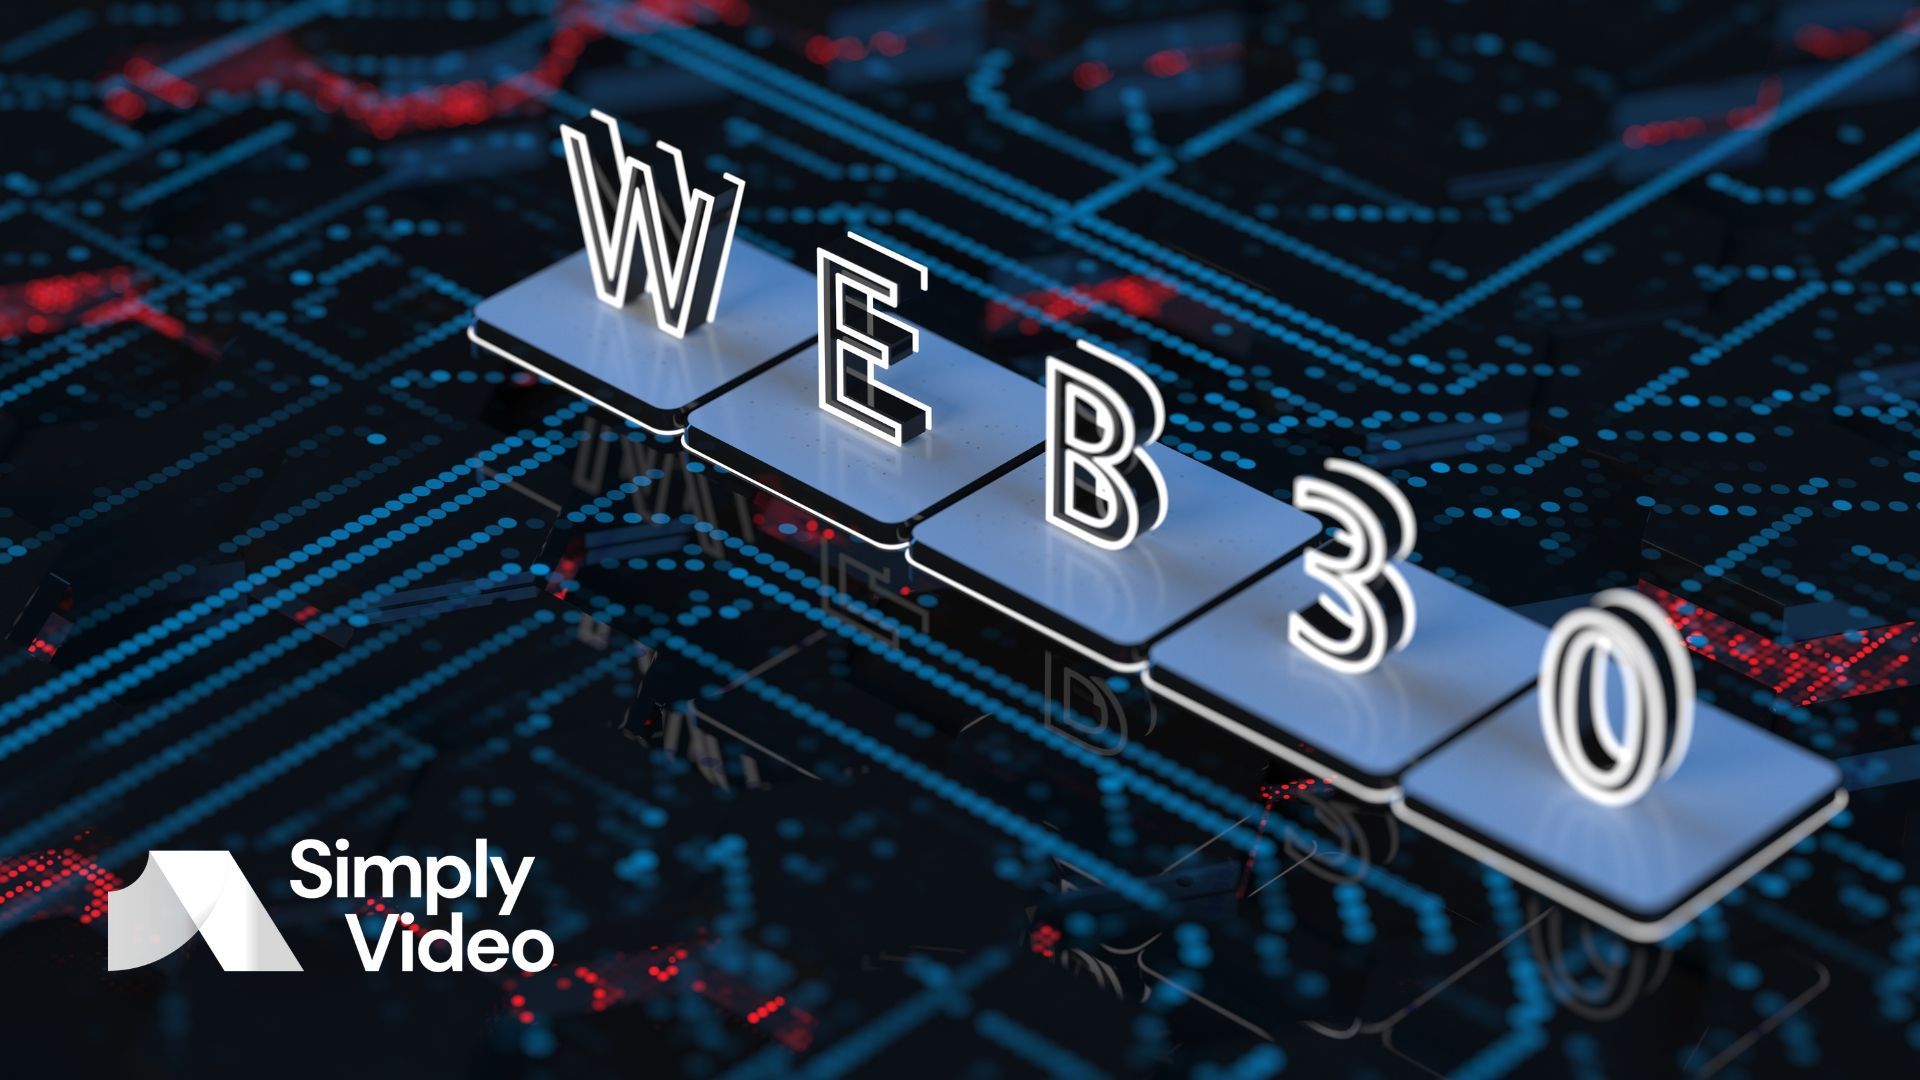 There are very few trilogies where each film is better than the last – but could Web 3.0 be better for users than its predecessors? Read on for the facts.